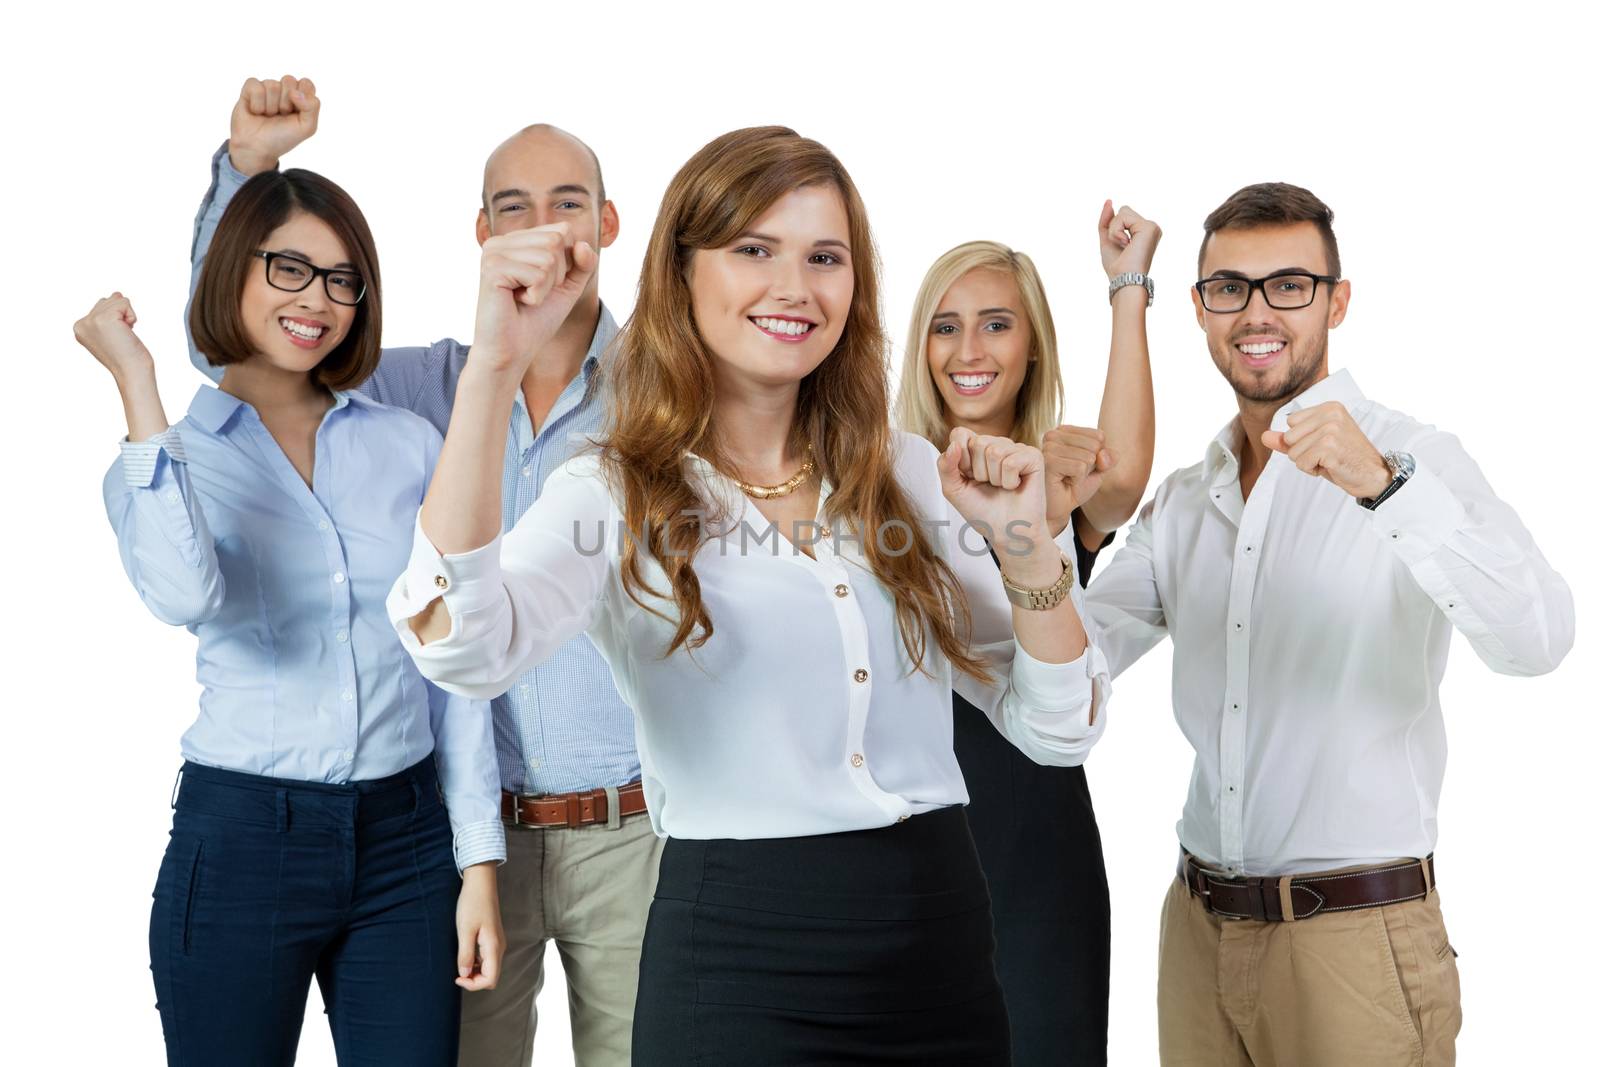 Successful business team of diverse young executives standing cheering and celebrating their success with an attractive young businesswoman or team leader in the foreground, on white